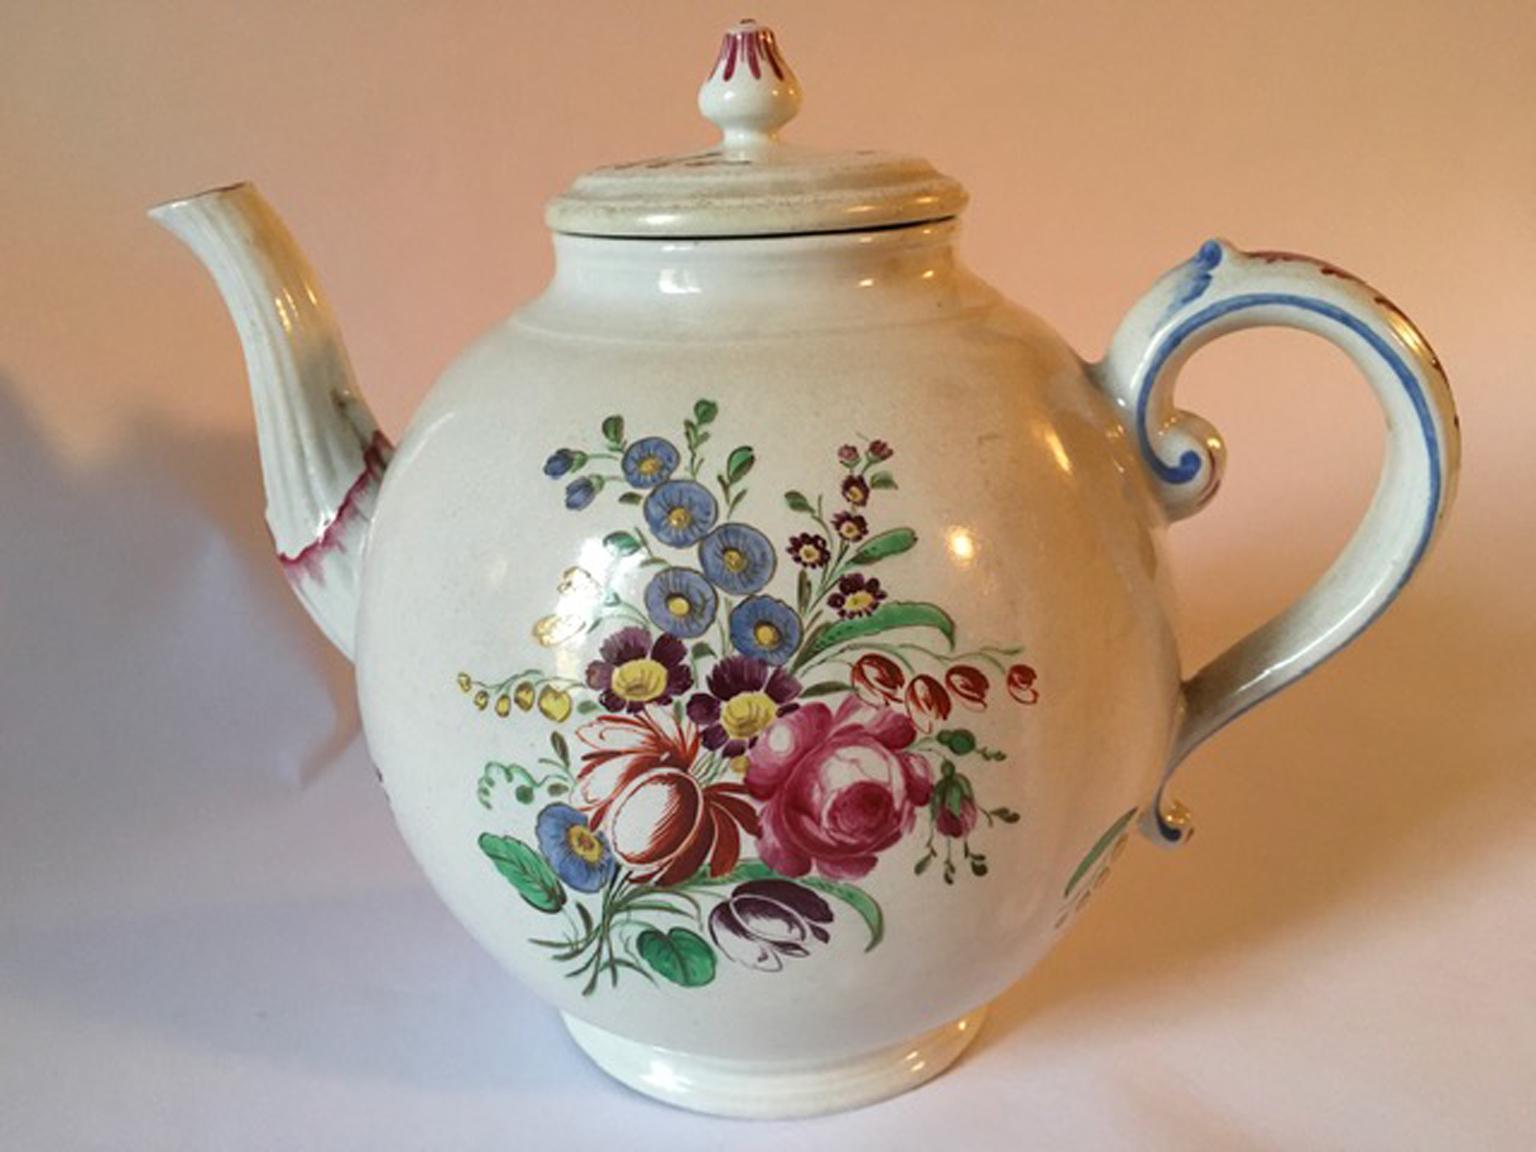 Doccia, Richard Ginori 1750 porcelain tea pot with multi-color floral drawings,
Italy.
This porcelain tea pot with multicolors floral drawing is an elegant piece, useful to enrich a services pieces collections.
With Certificate of Authenticity.